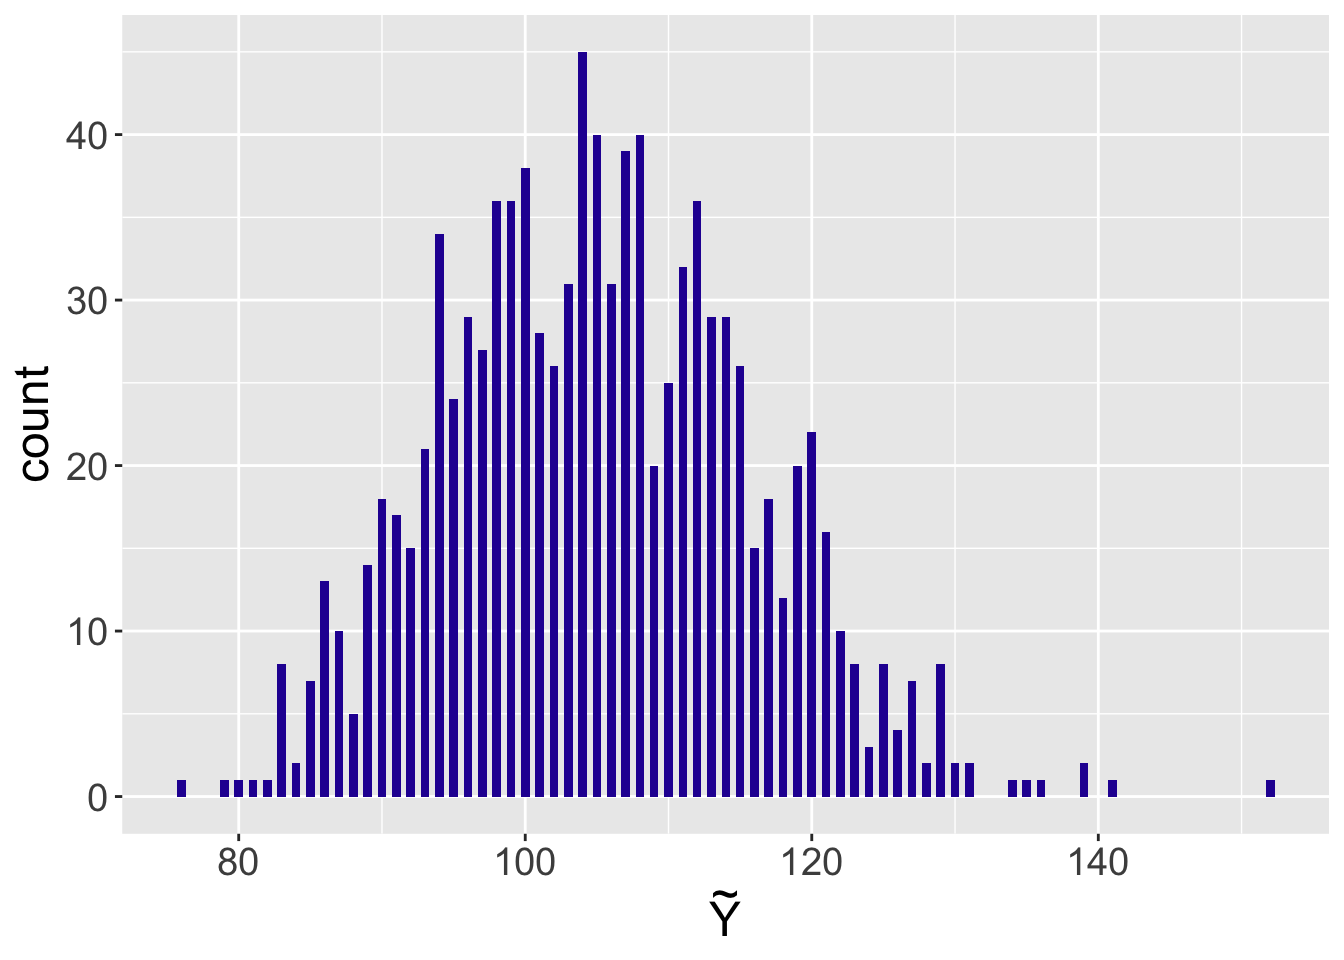 Histogram of a simulated sample from the posterior predictive distribution of the number of visitors to the website on a future day.